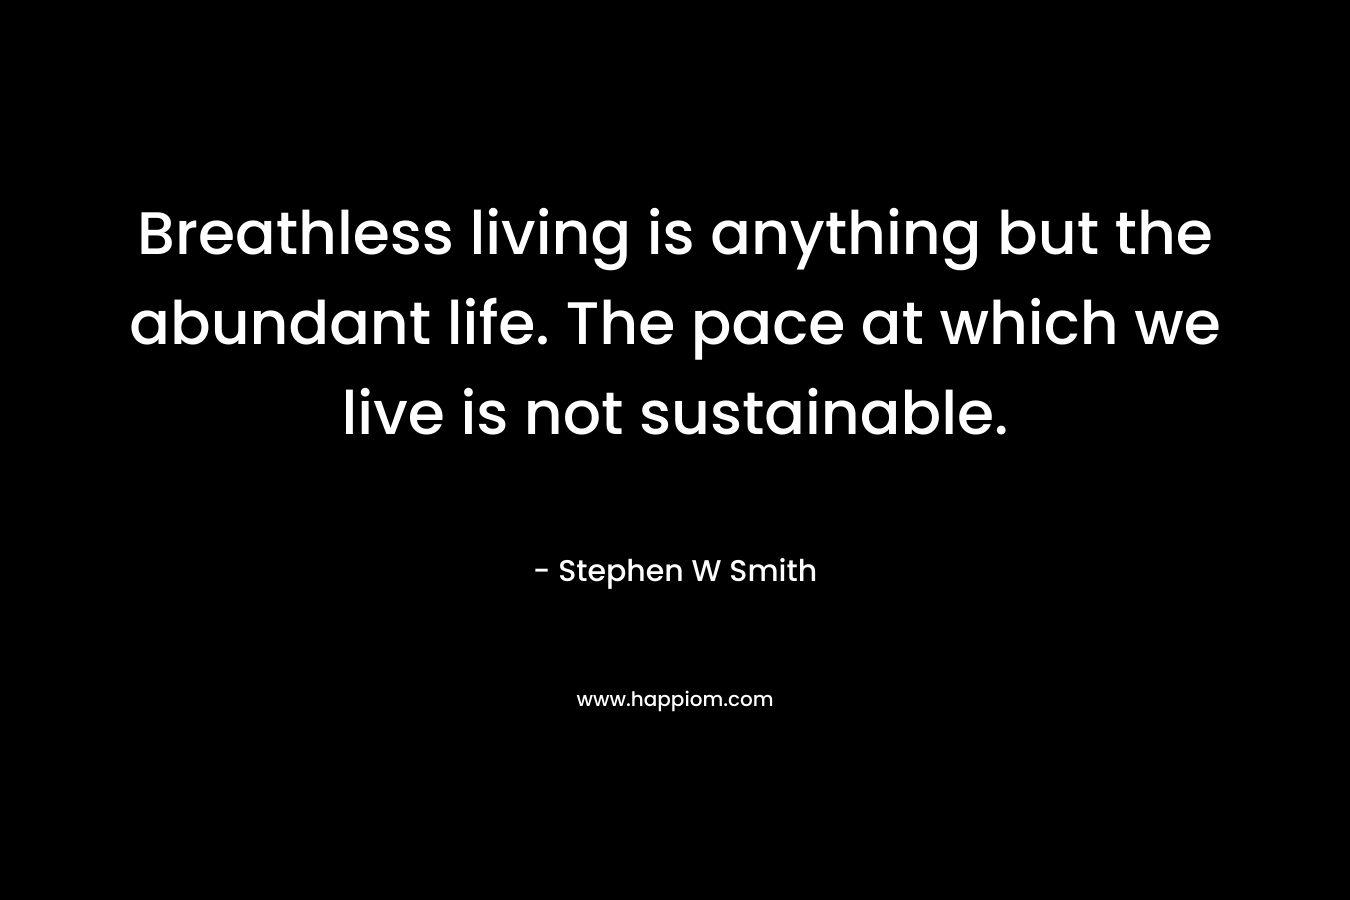 Breathless living is anything but the abundant life. The pace at which we live is not sustainable. – Stephen W Smith